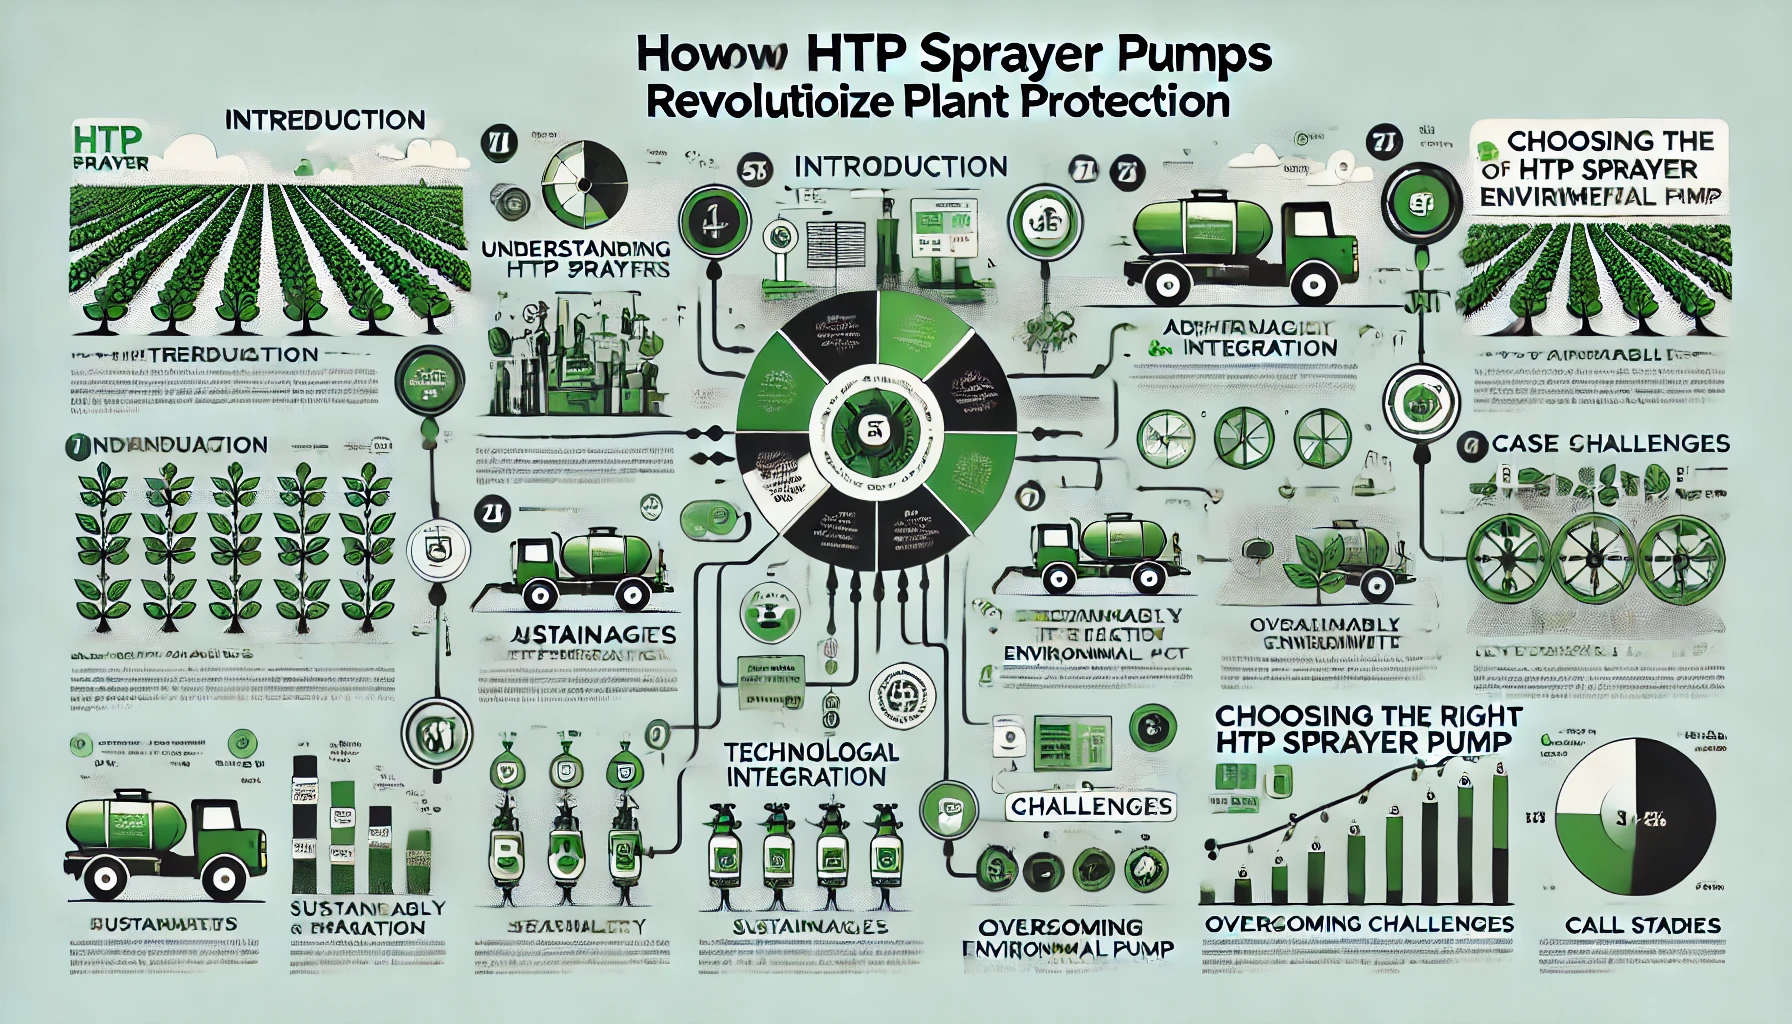 how HTP sprayer pumps revolutionize plant protection with a green theme.jpg